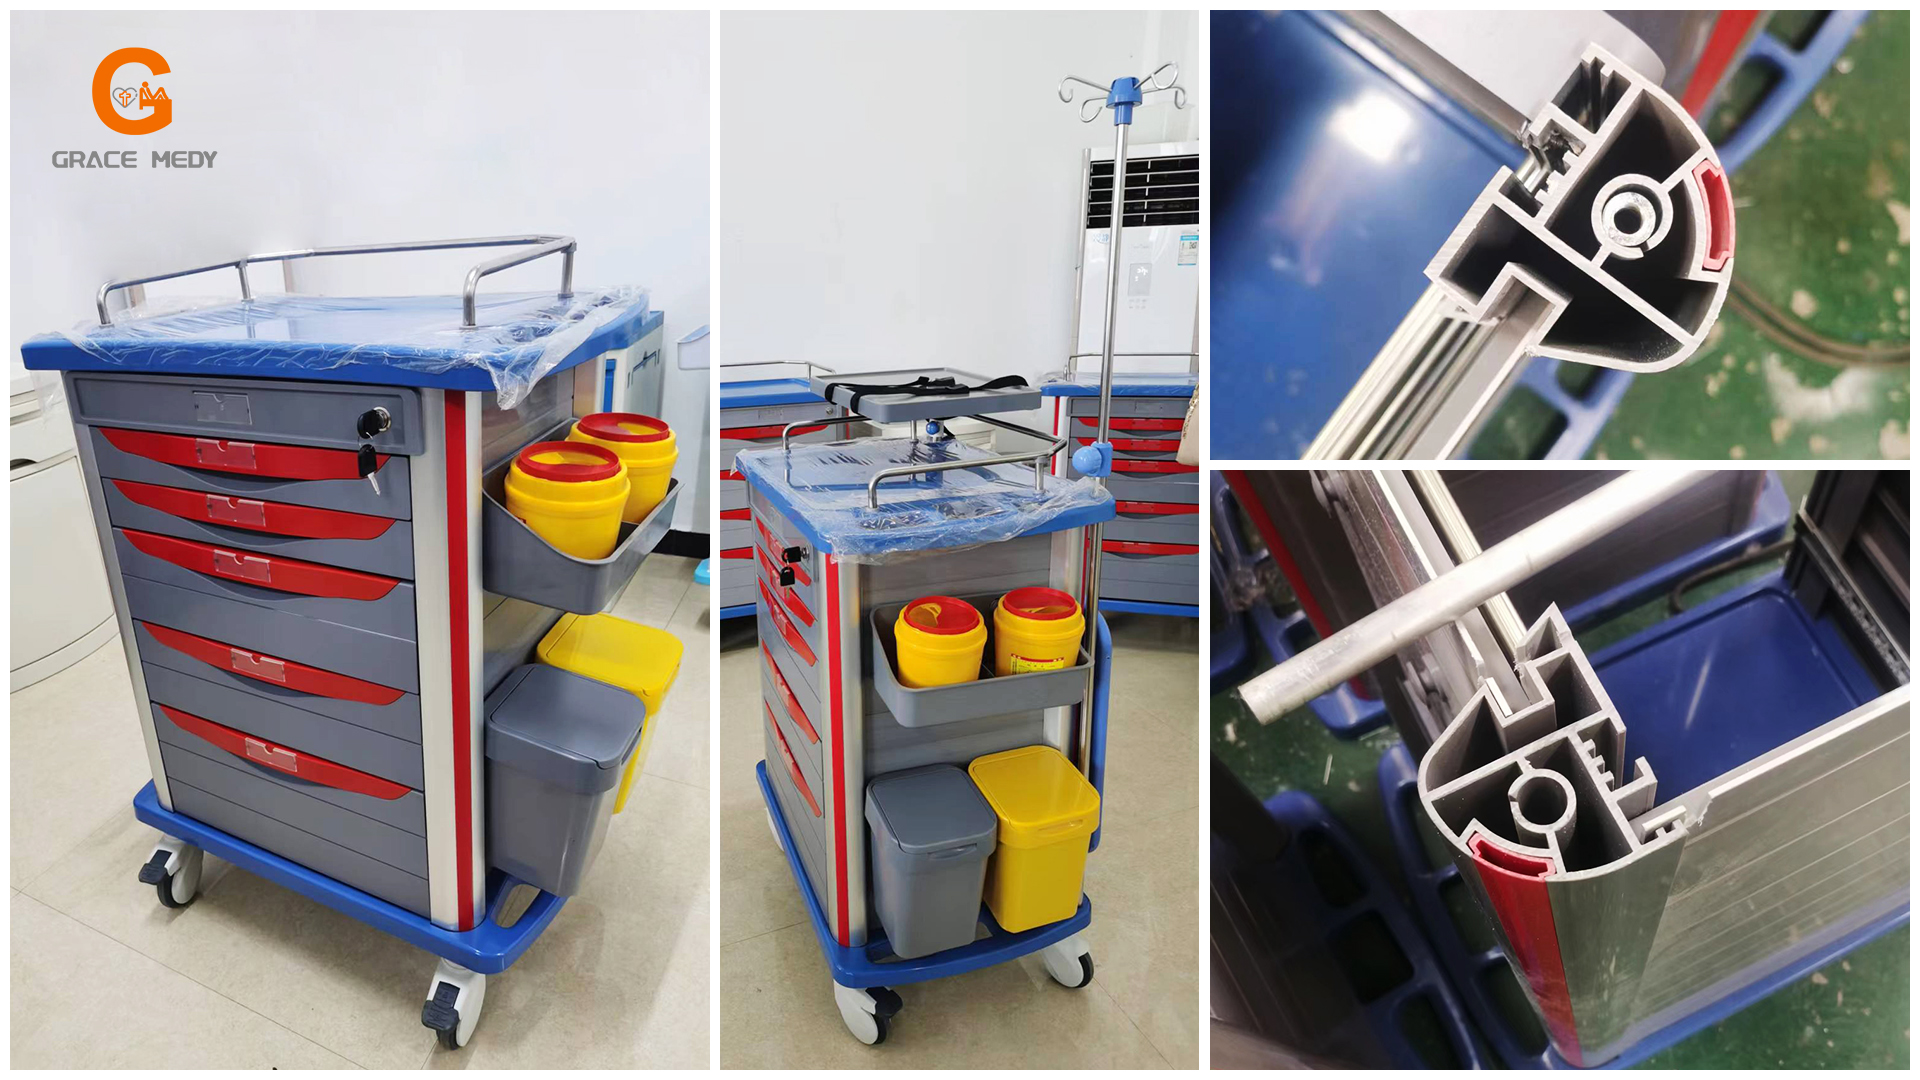 How to find suitable medical carts, such as ambulance carts, medicine delivery carts, anesthesia carts, etc.?